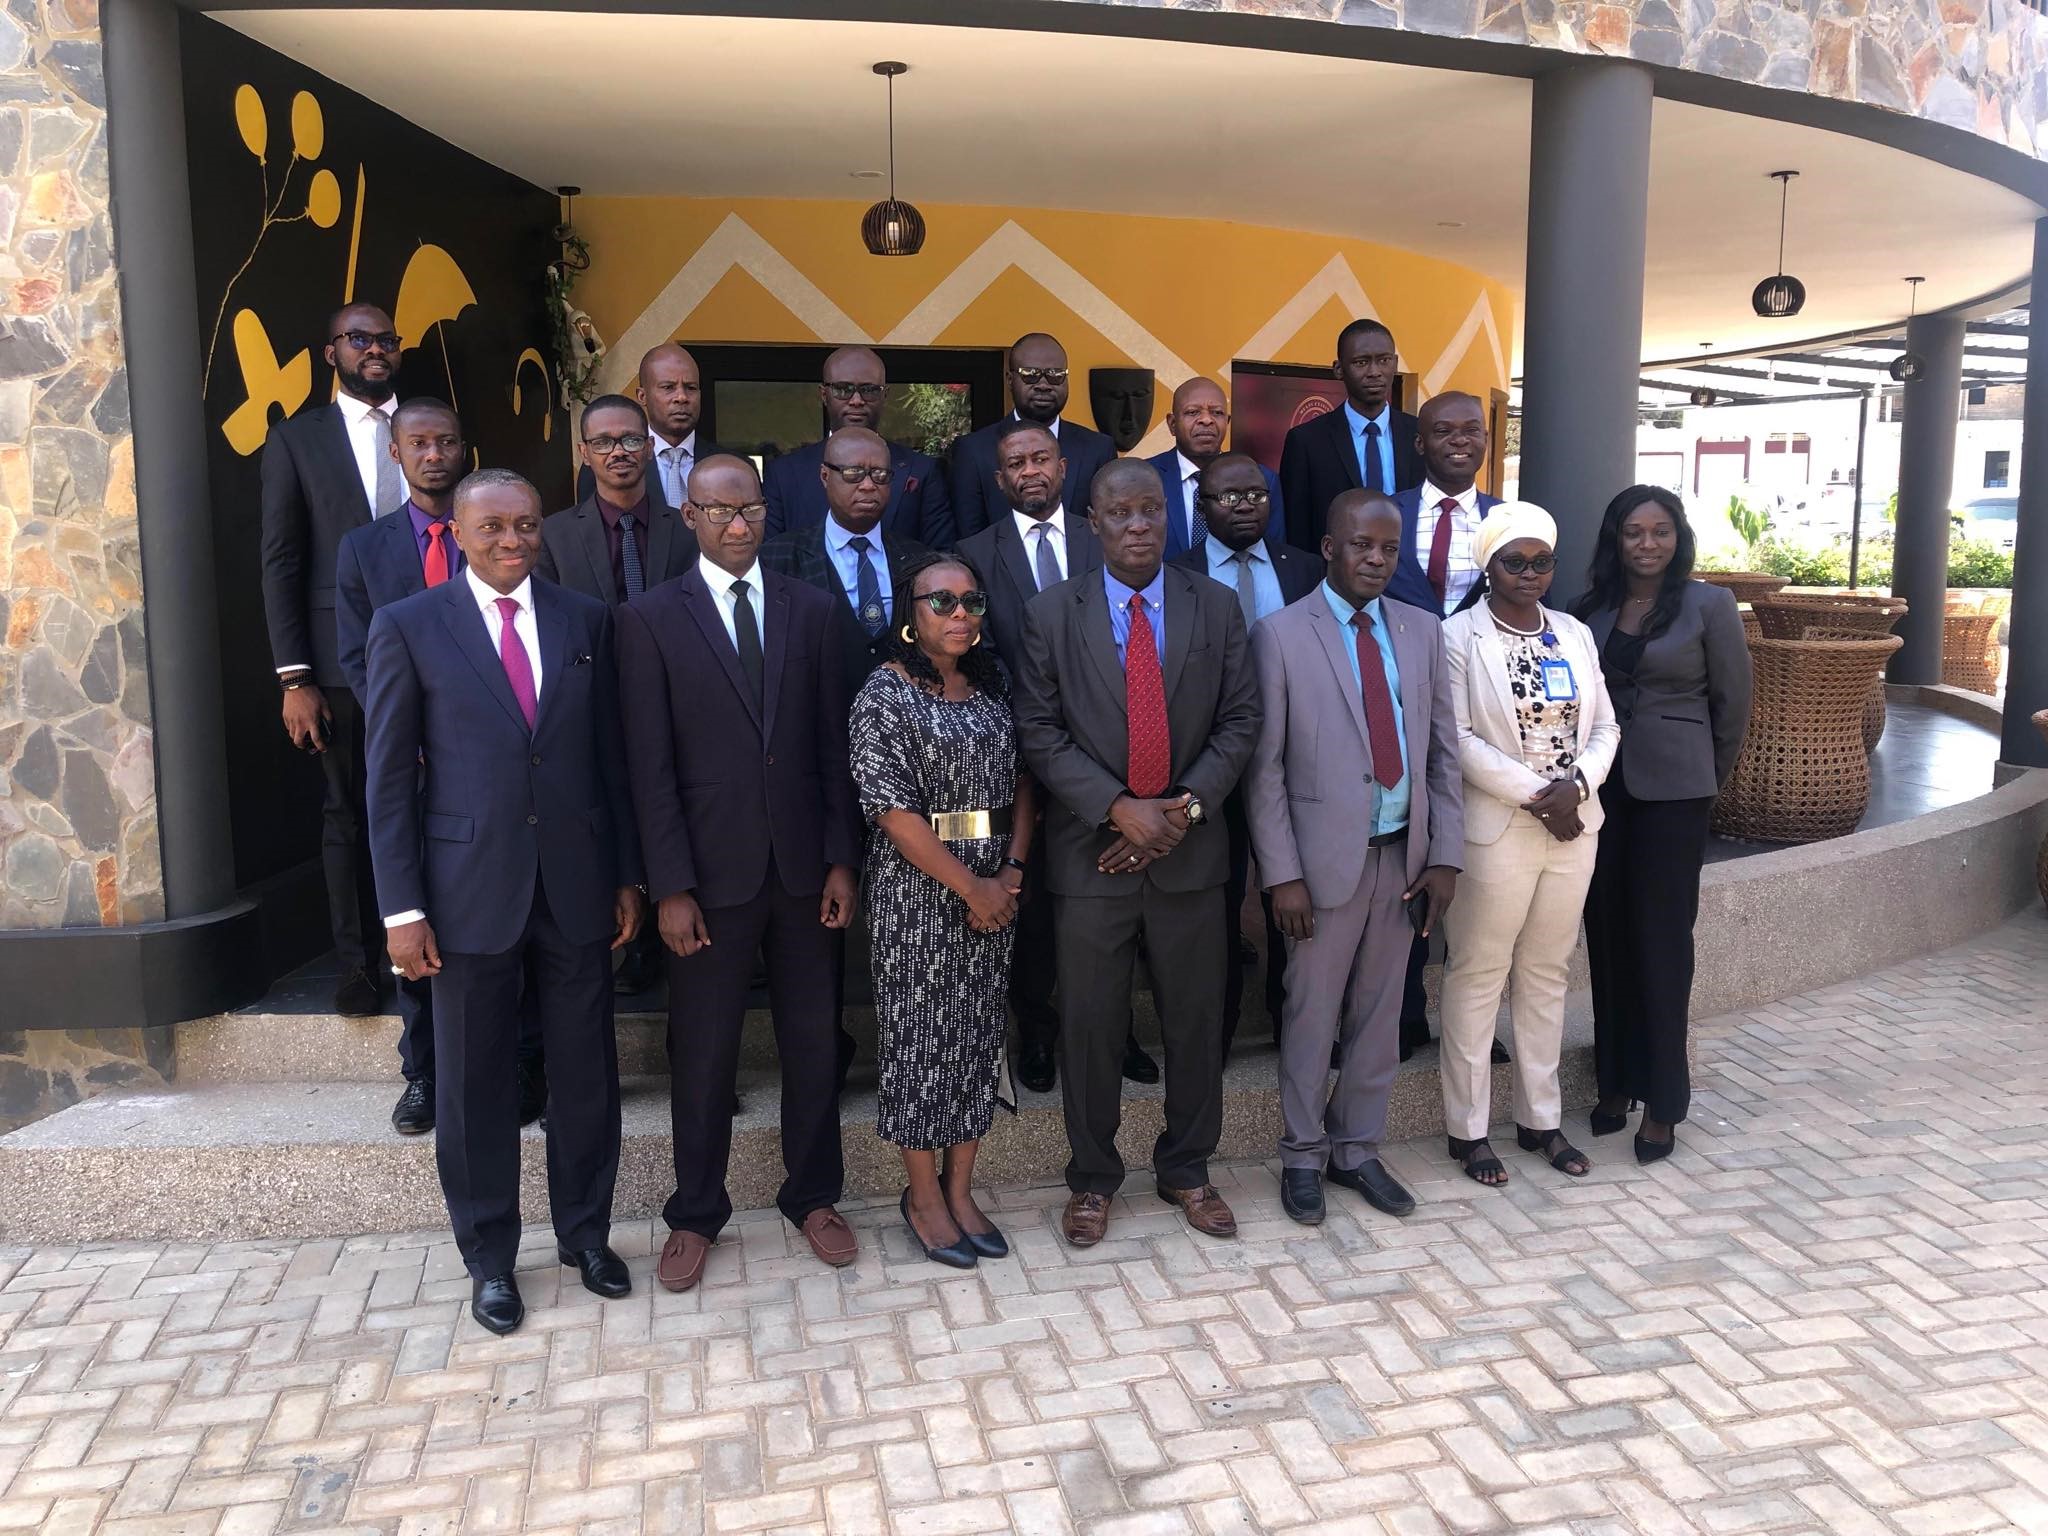  Central Bank commences 8th CSNBFI Meeting in Banjul